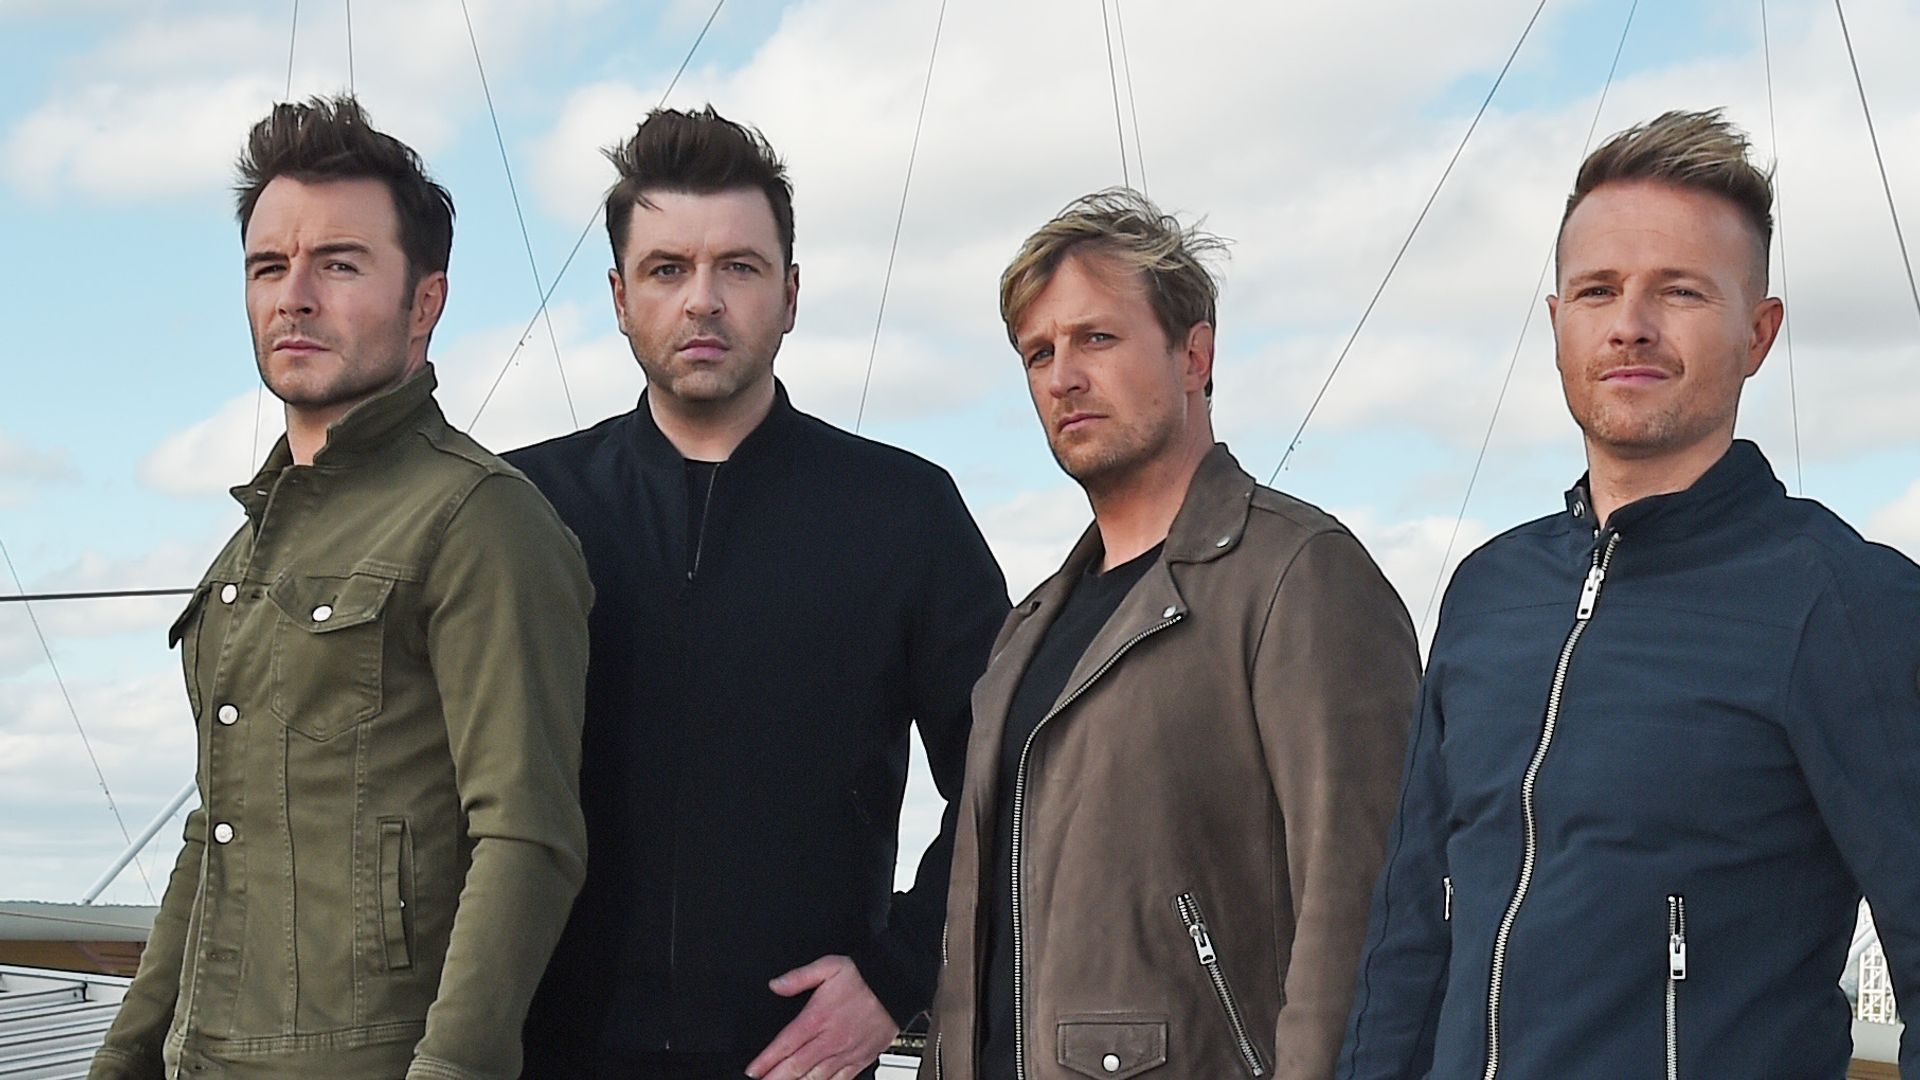 Four members of |Westlife stood on Wembley Arena